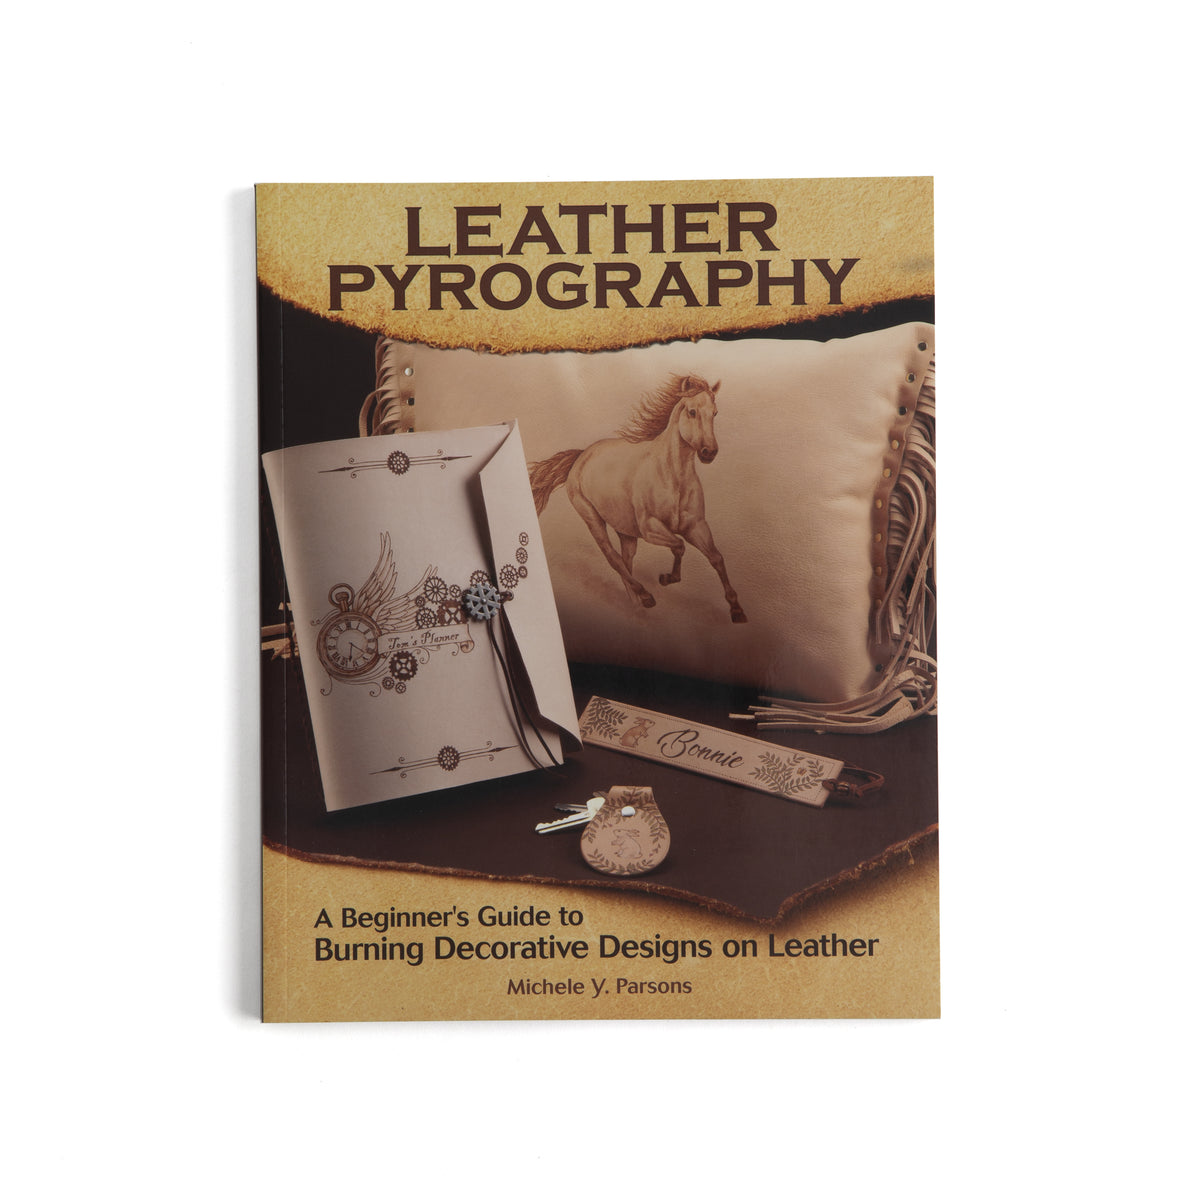 How To Burn Leather: Leather Pyrography Guide - Von Baer